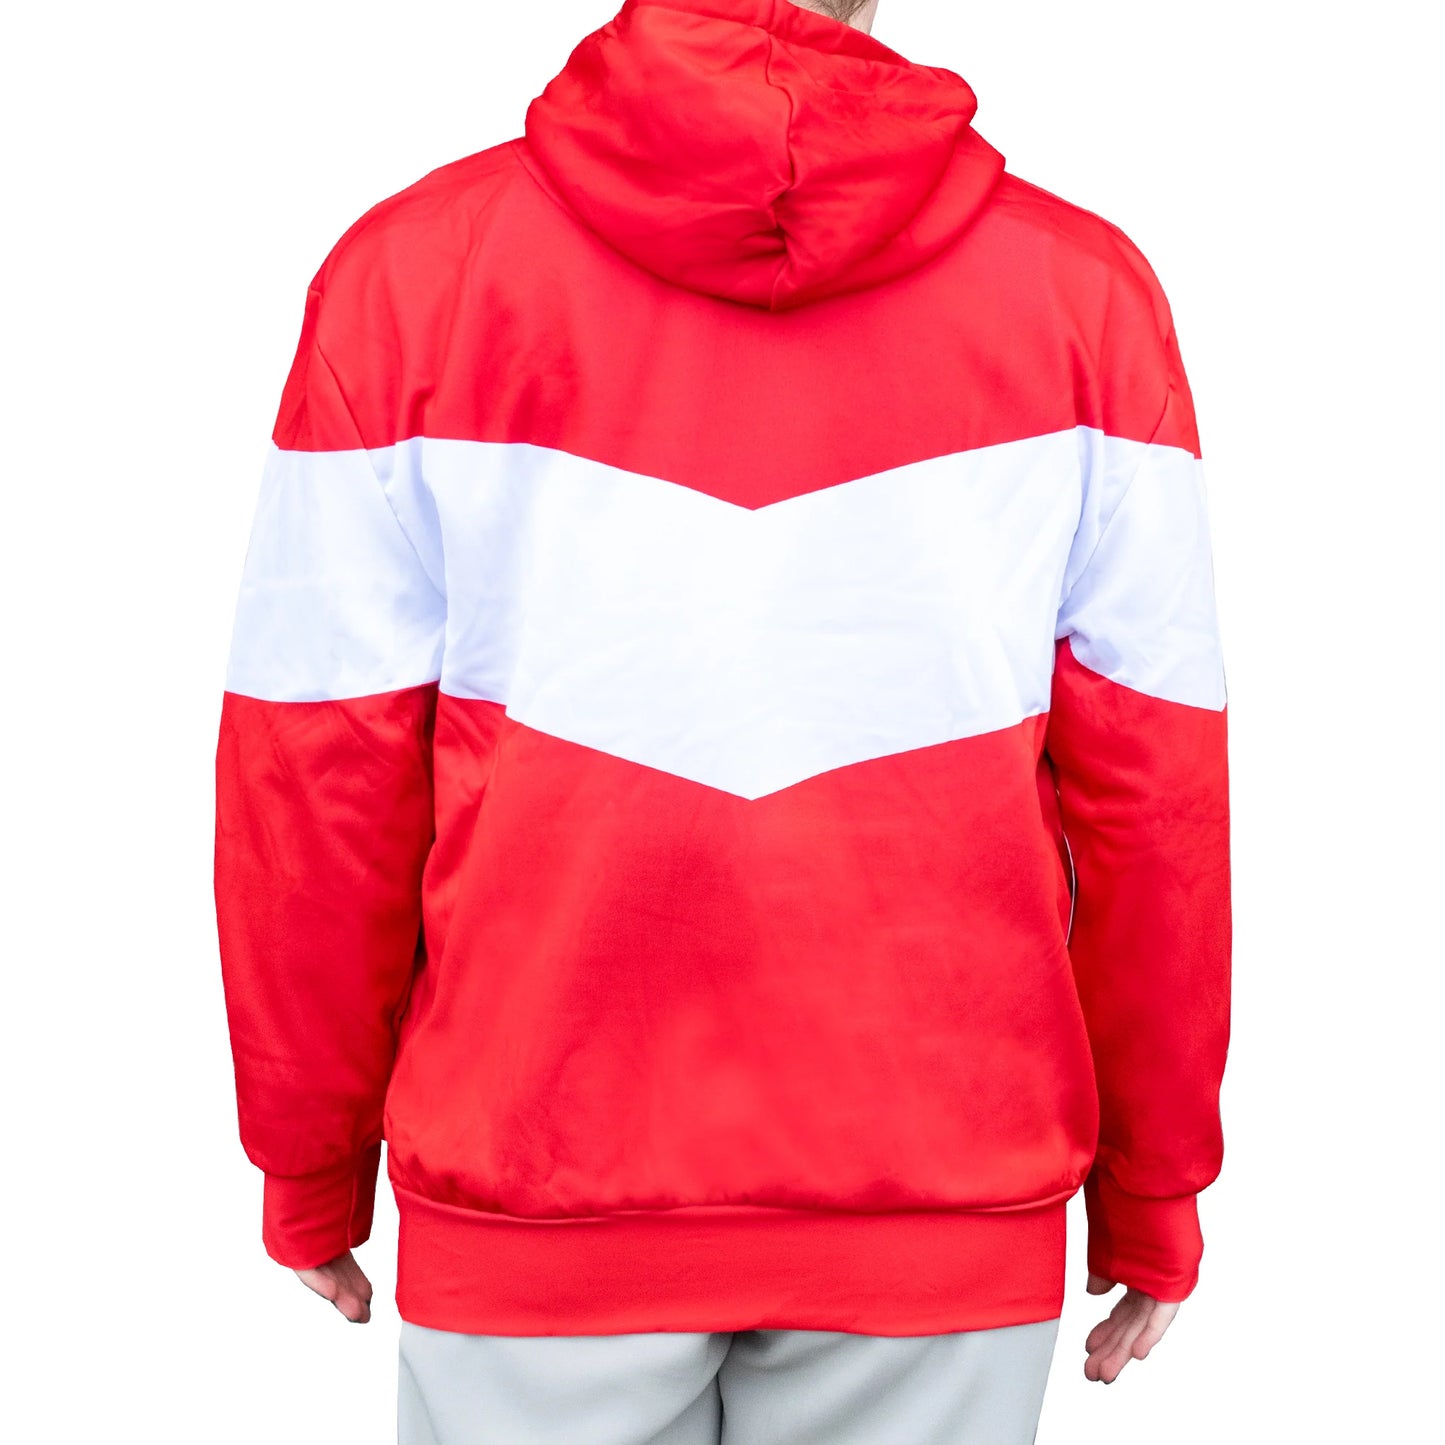 Poland Hoodie Red&White With Polska Sign And Polish Eagle